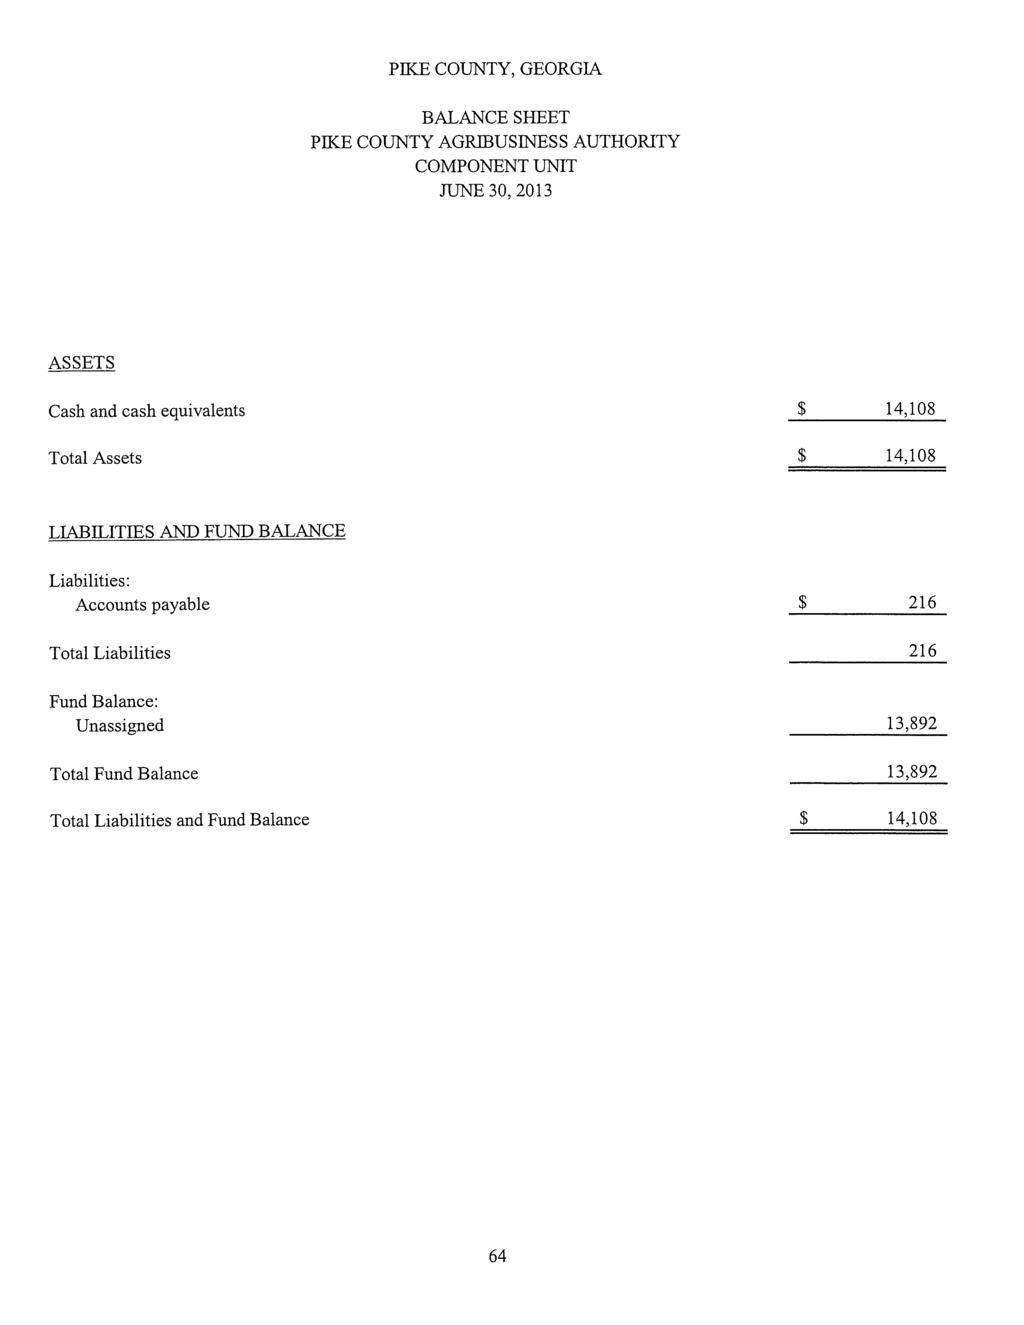 P11CE COUNTY, GEORGIA BALANCE SHEET PIKE COUNTY AGRIBUSINESS AUTHORITY COMPONENT UNIT JUNE 30, 2013 ASSETS Cash and cash equivalents Total Assets $ 14,108 $ 14,108 LIABILITIES